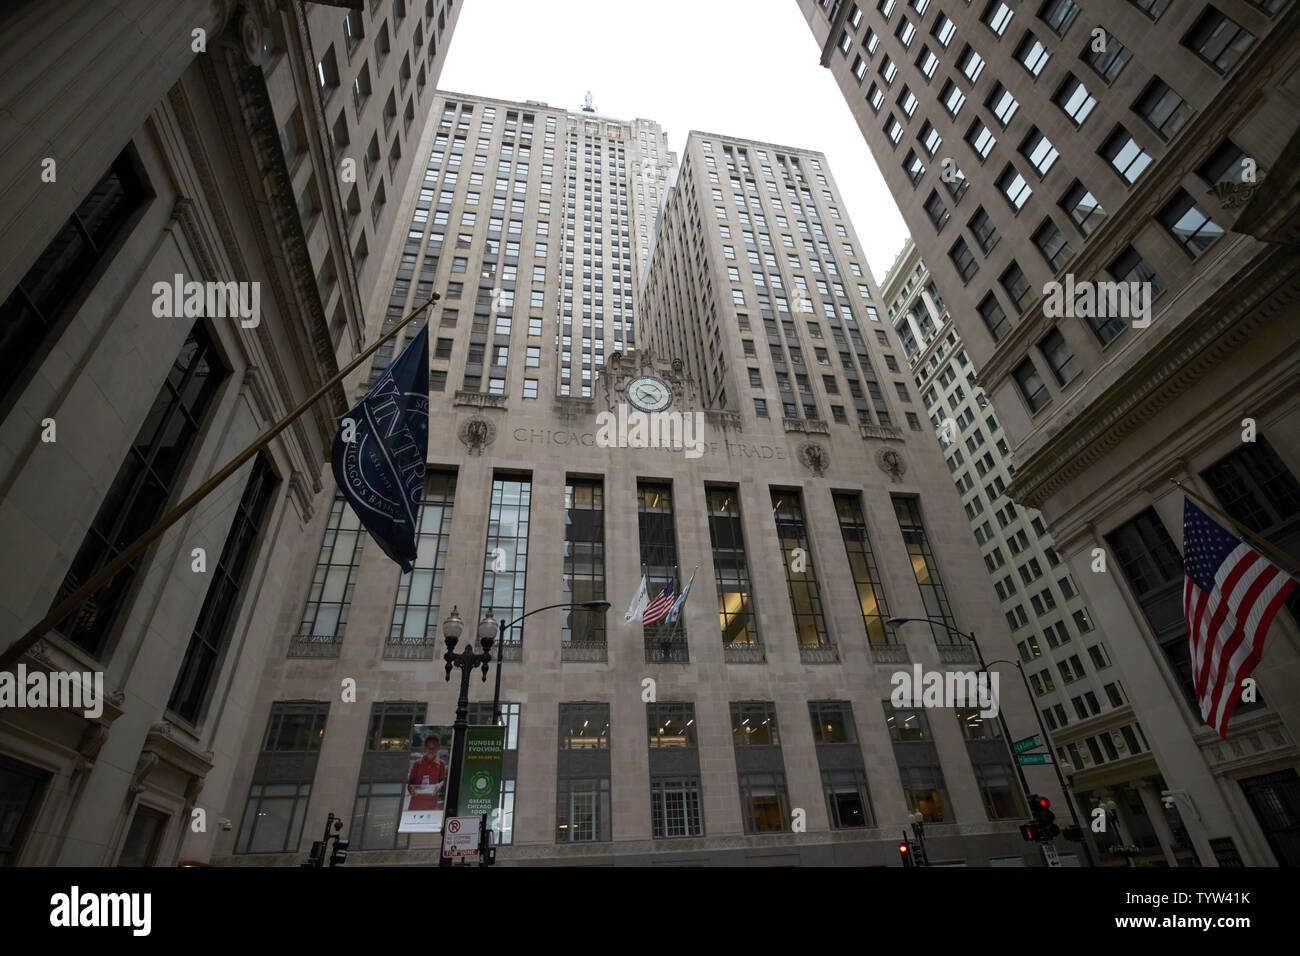 The chicago board of trade building on a dark overcast day in the financial district of the loop Chicago IL USA Stock Photo